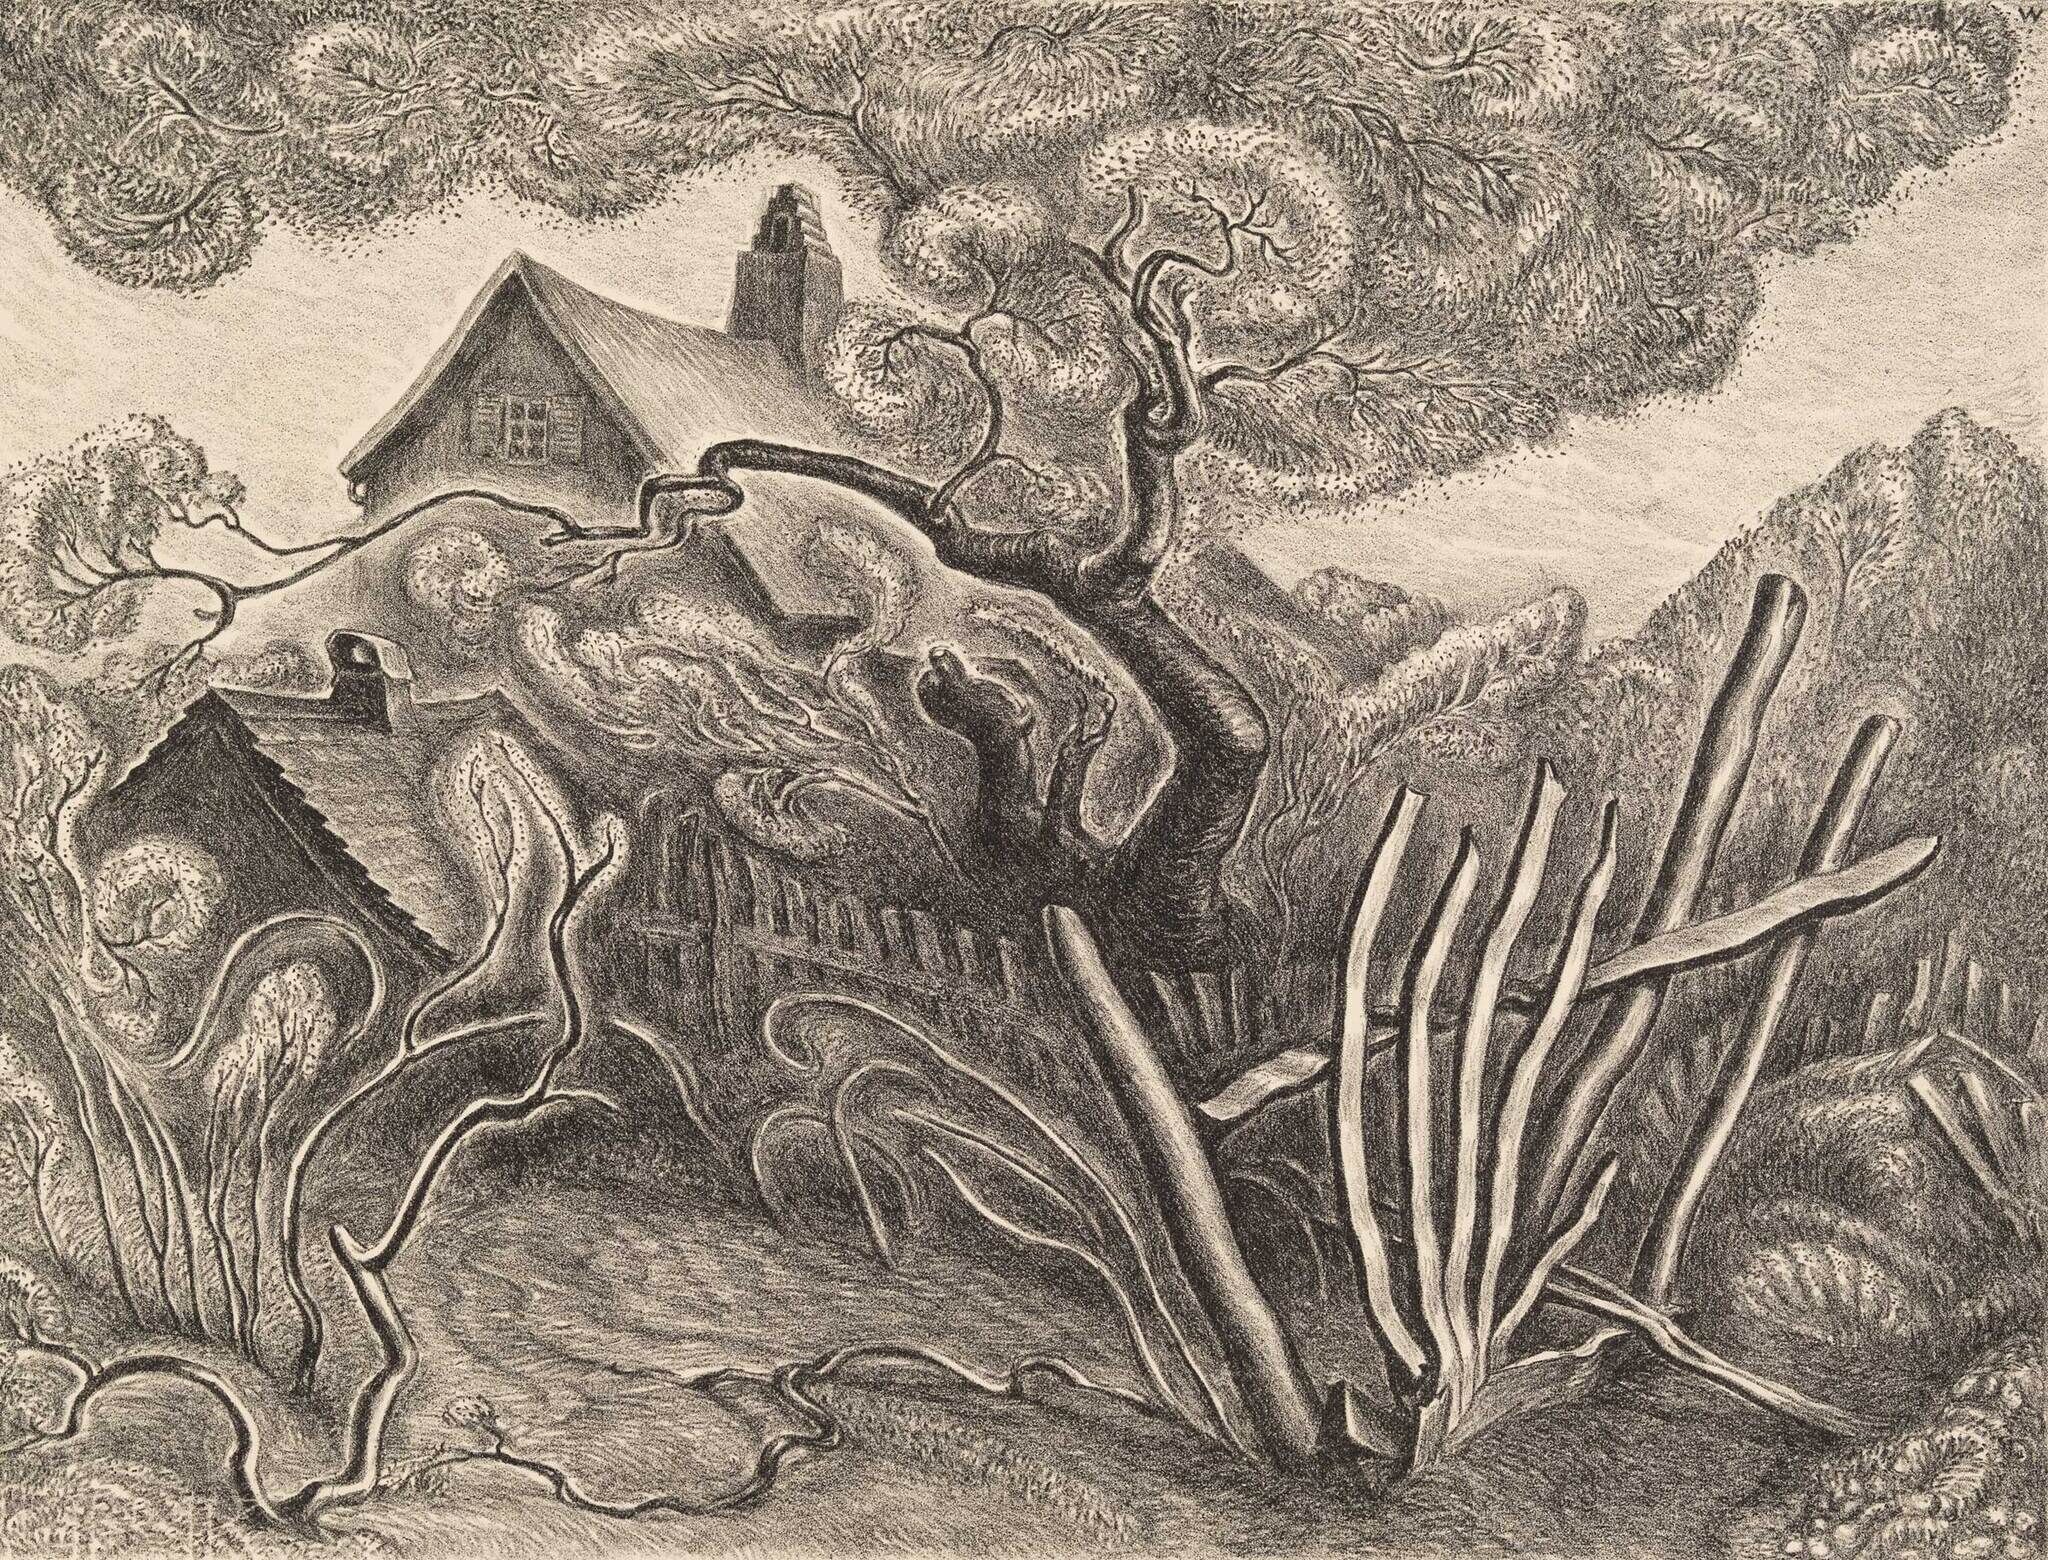 Detailed pencil drawing of a whimsical landscape with distorted trees and a cottage.